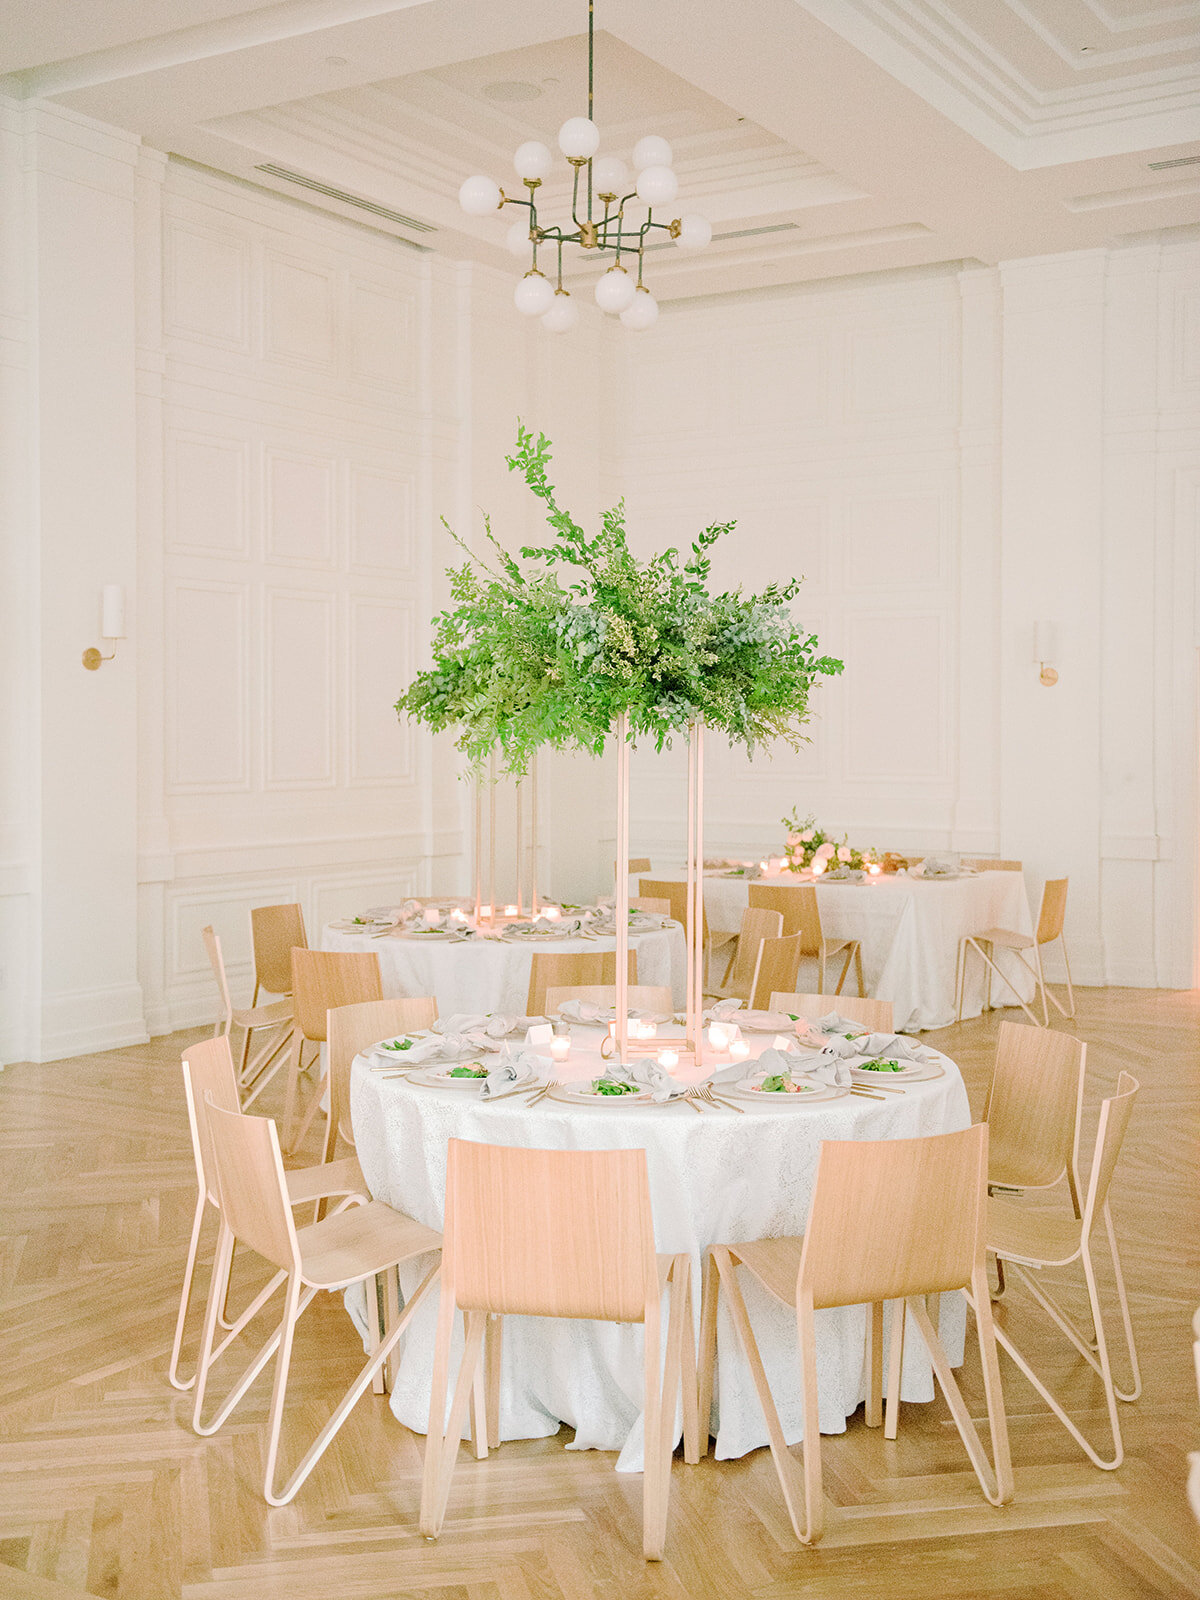 All greenery arrangement on modern gold stand for an elegant blush and cream wedding at the Noelle, Nashville.